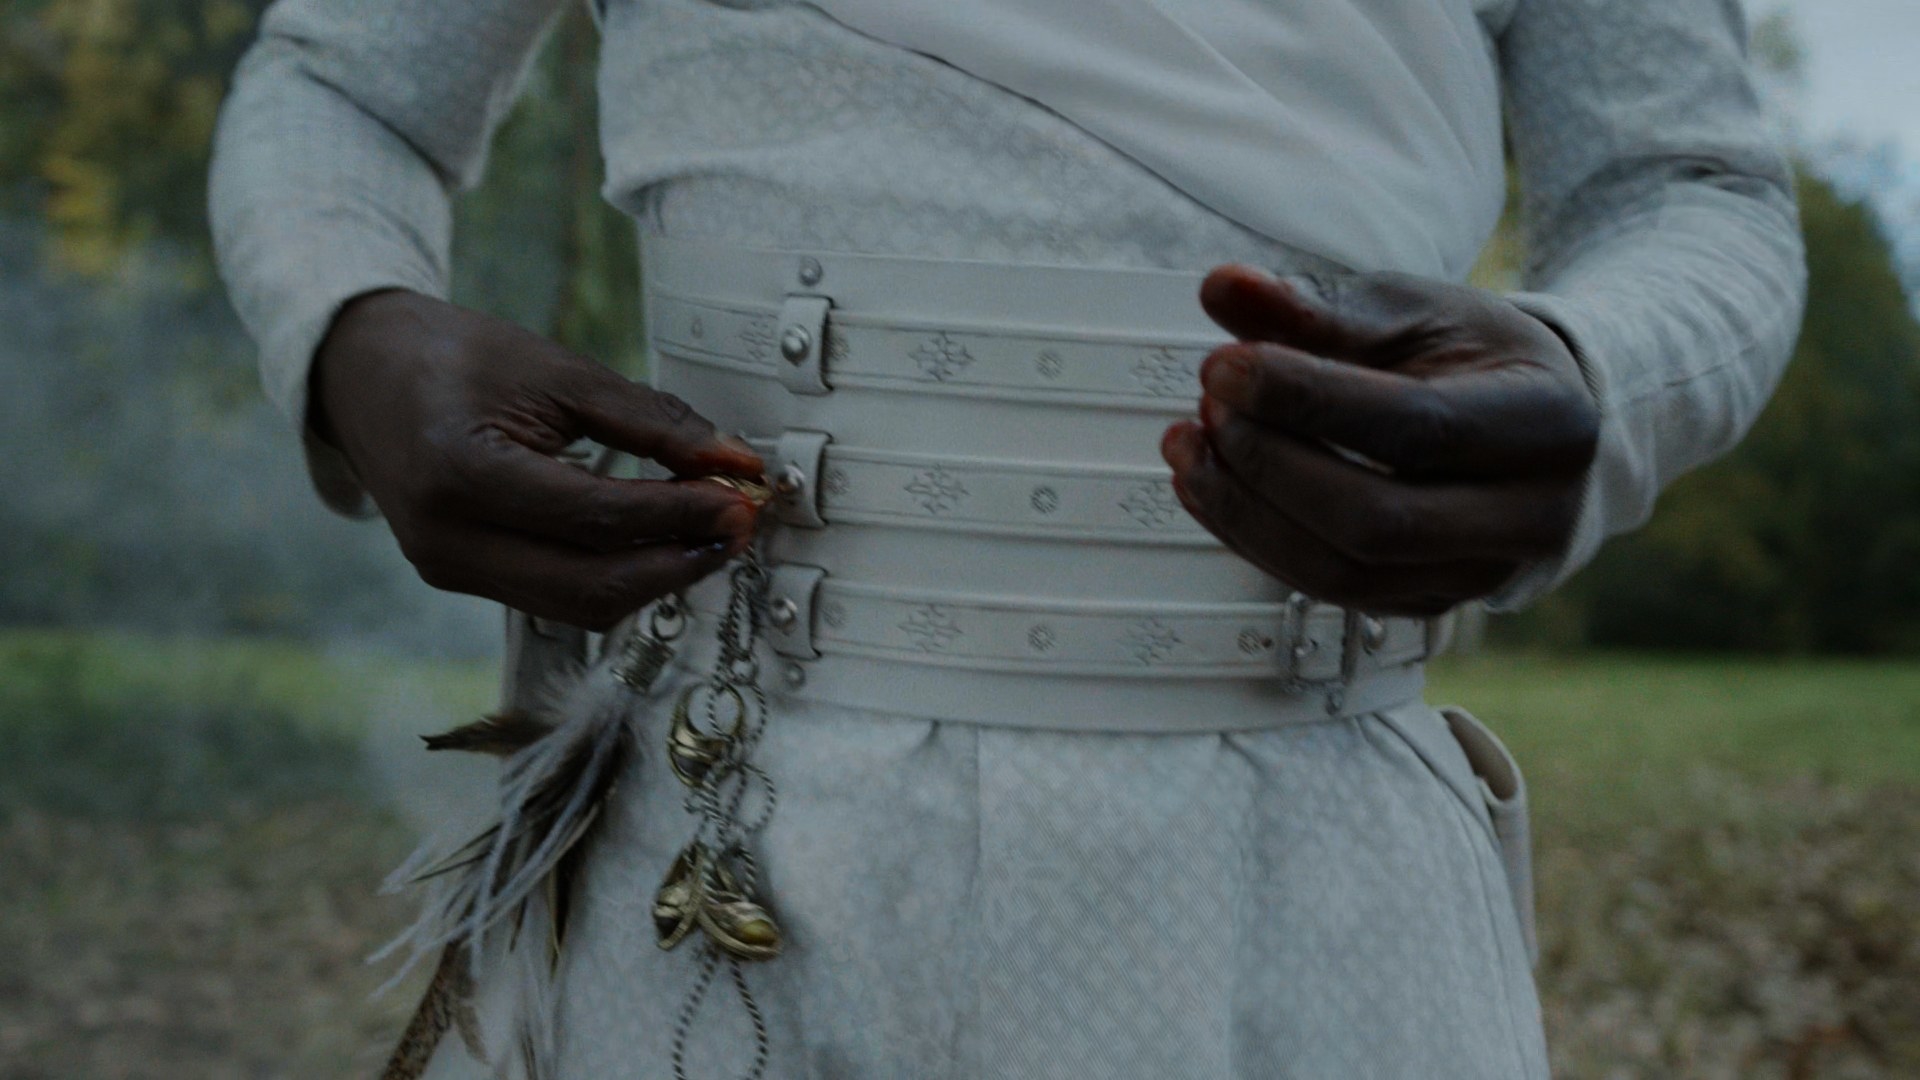 A close-up on Eamon Valda’s (Abdul Salis) midsection, clothed in white – he has a chain dangling from his white belt showing many Aes Sedai rings of different colors, including one he has just added, a yellow ring covered in blood